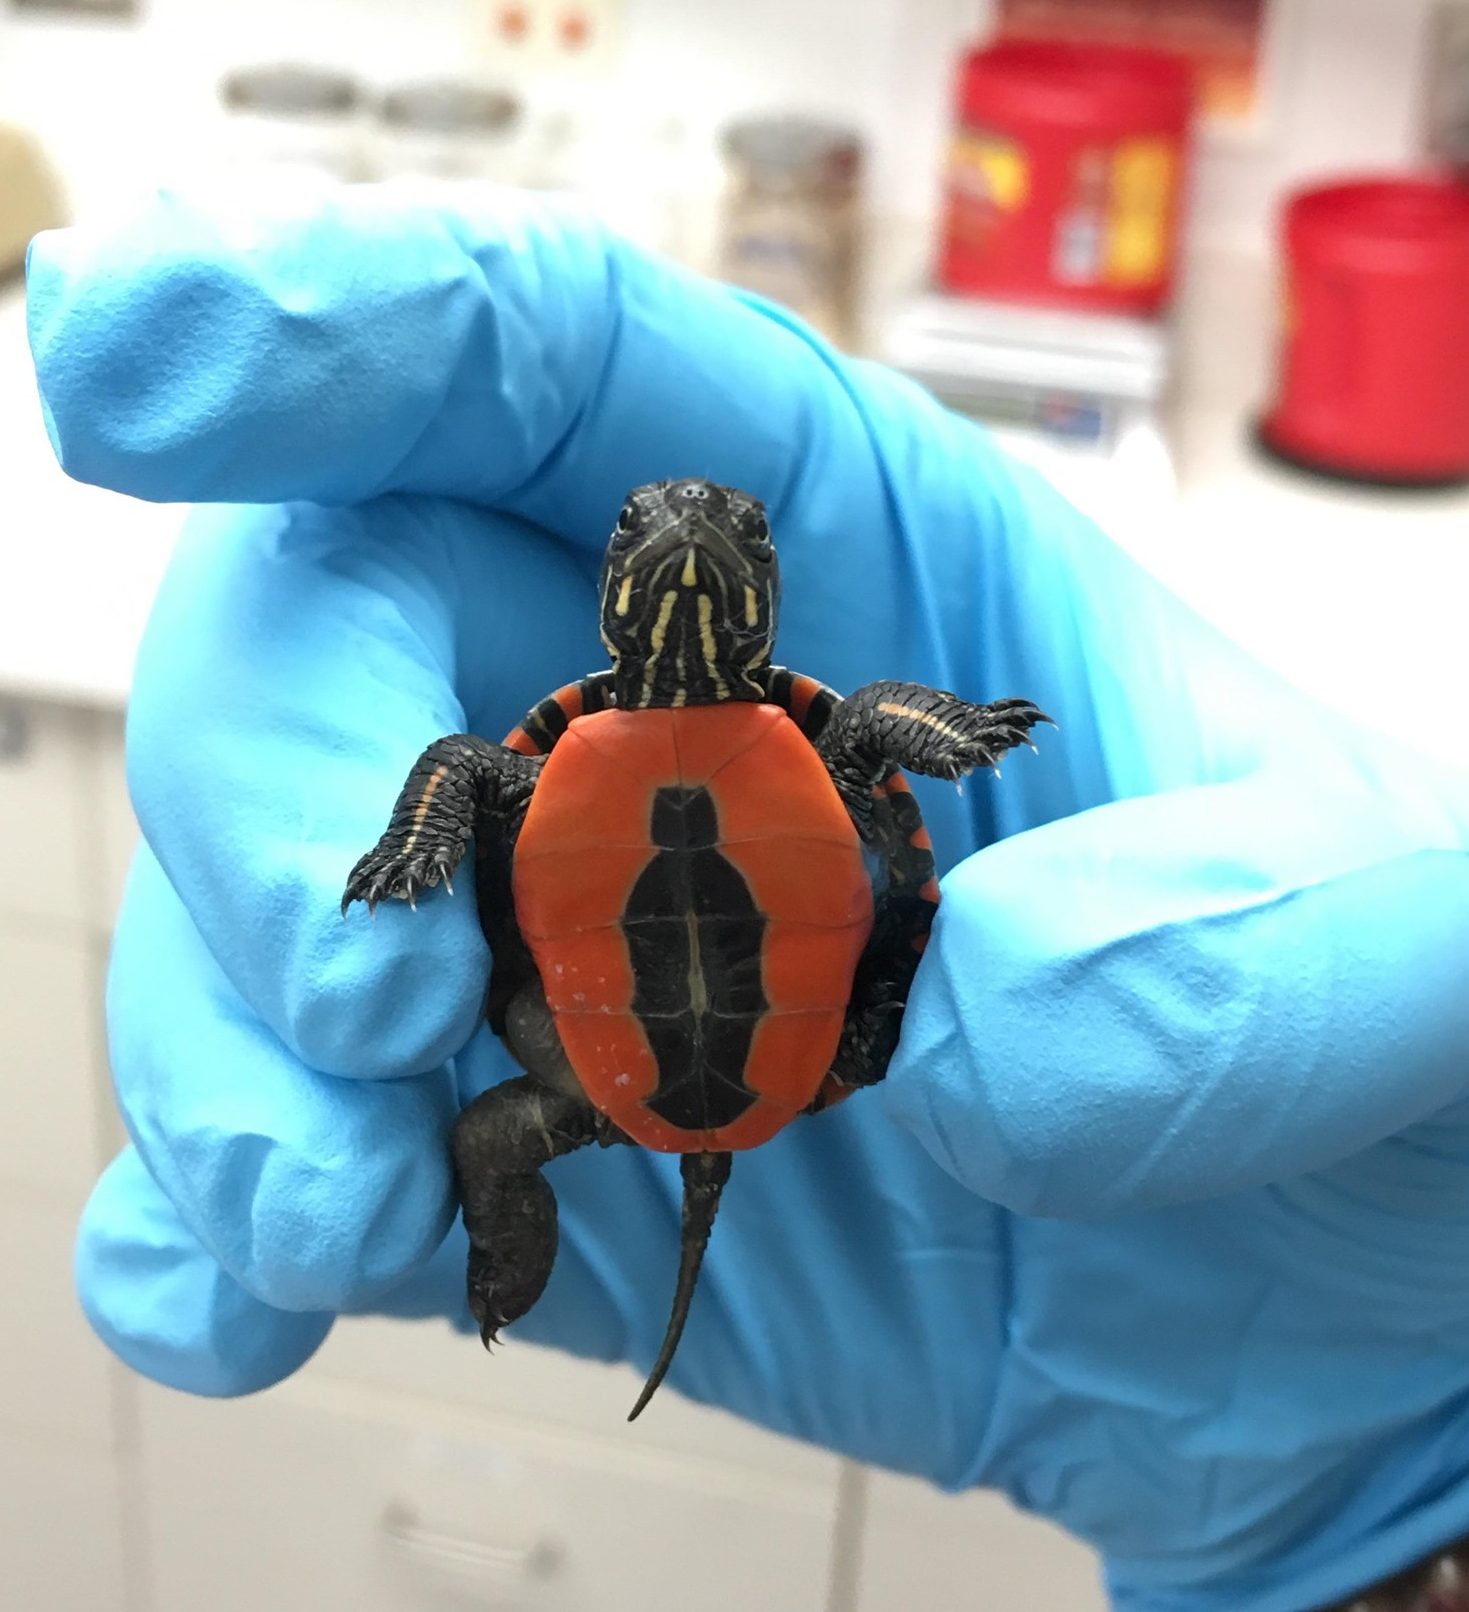 Why Did the Turtle Cross the Road? - Veterinary Medicine at Illinois